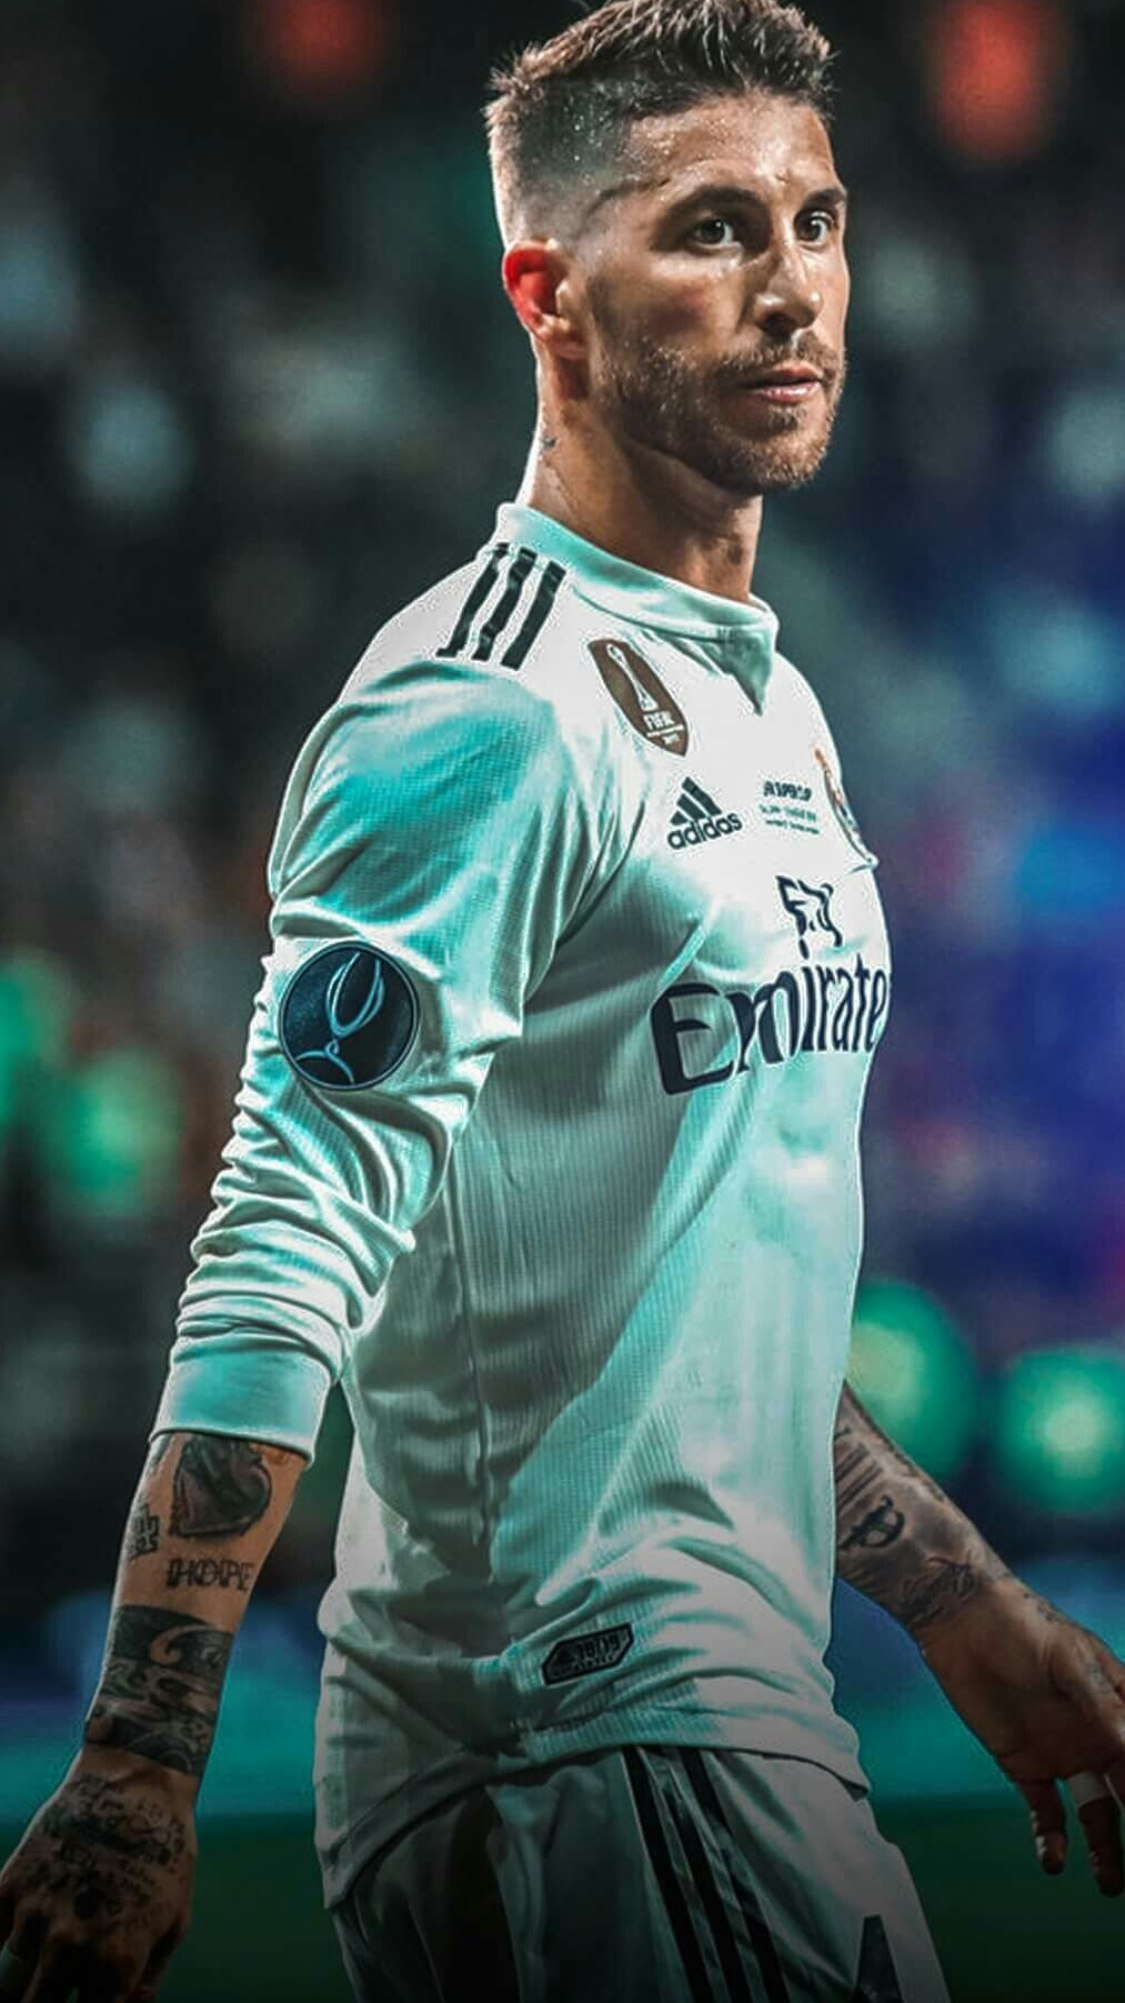 Germany Soccer Team: Sergio Ramos, A Spanish professional footballer who plays as a center-back for Ligue 1 club Paris Saint-Germain. 1130x2010 HD Background.